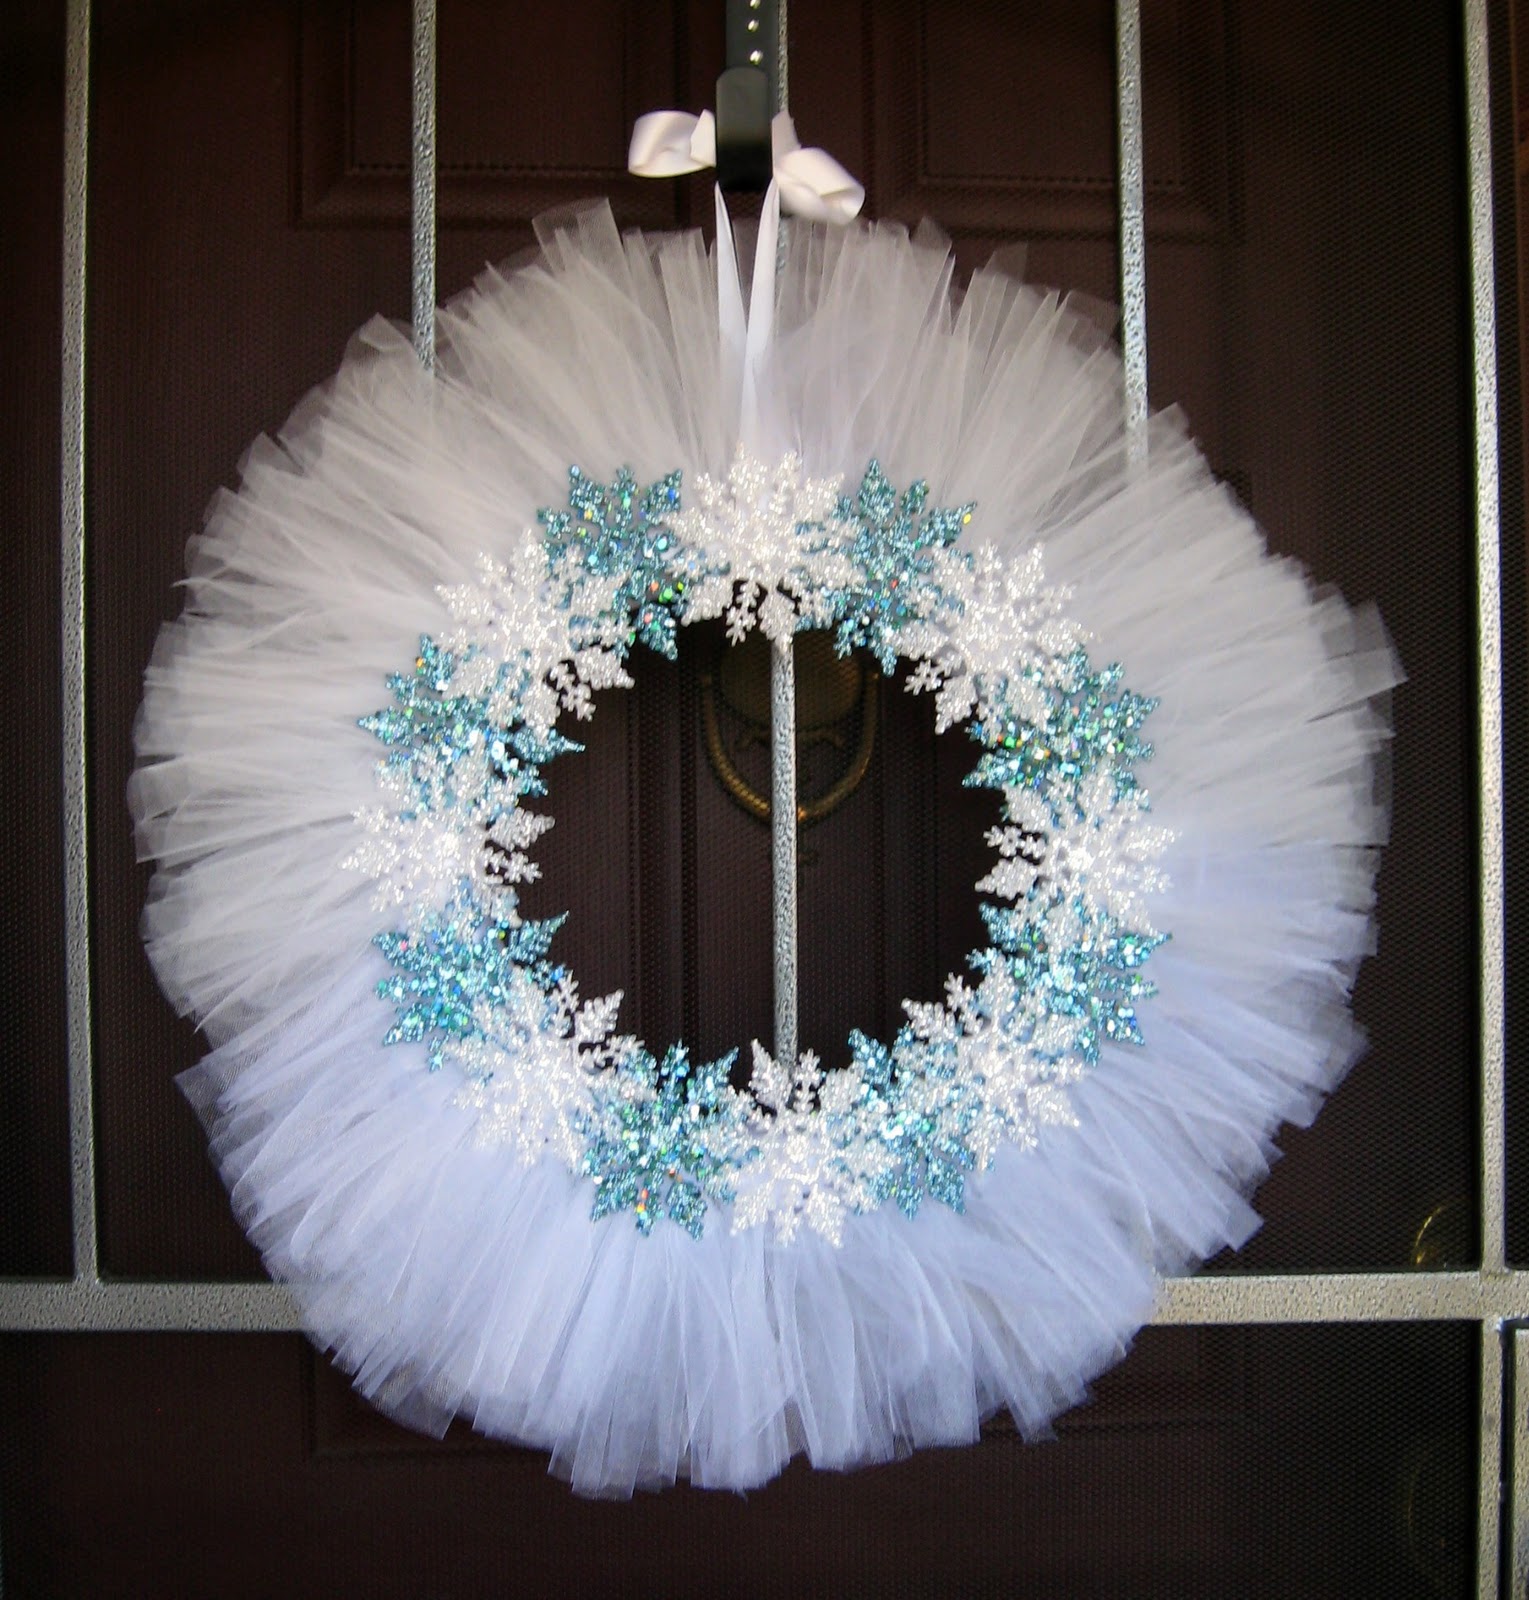 tulle wreath snowflake diy frozen wreaths winter birthday flowers snowflakes table decorations inspired fish likes blues creative cure door tutorials